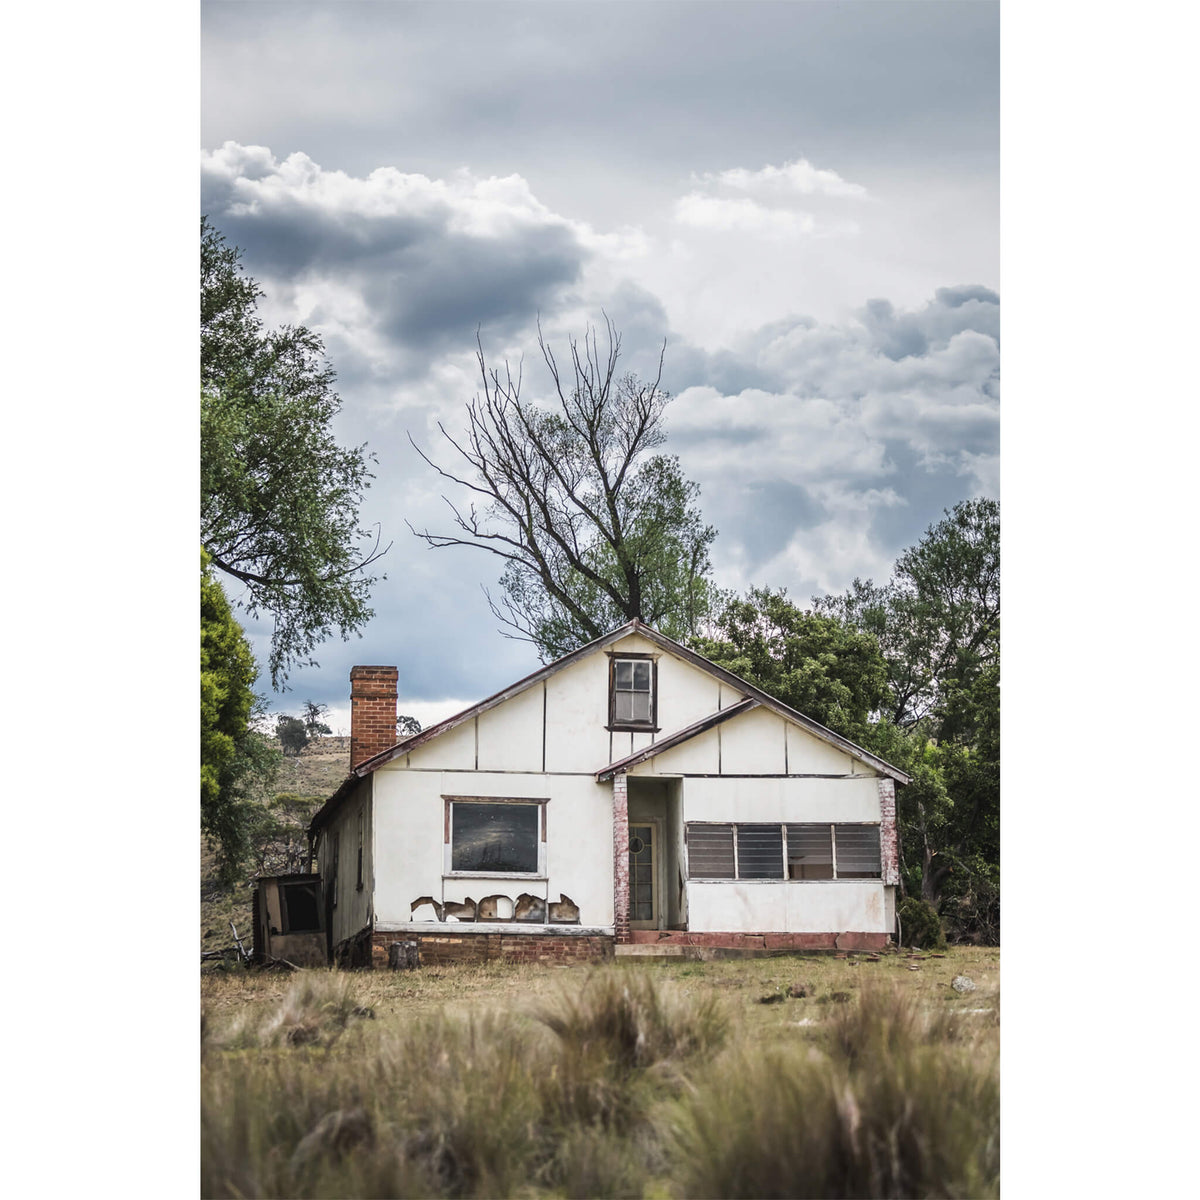 Brooding Skies | A Place to Call Home Fine Art Print - Lost Collective Shop